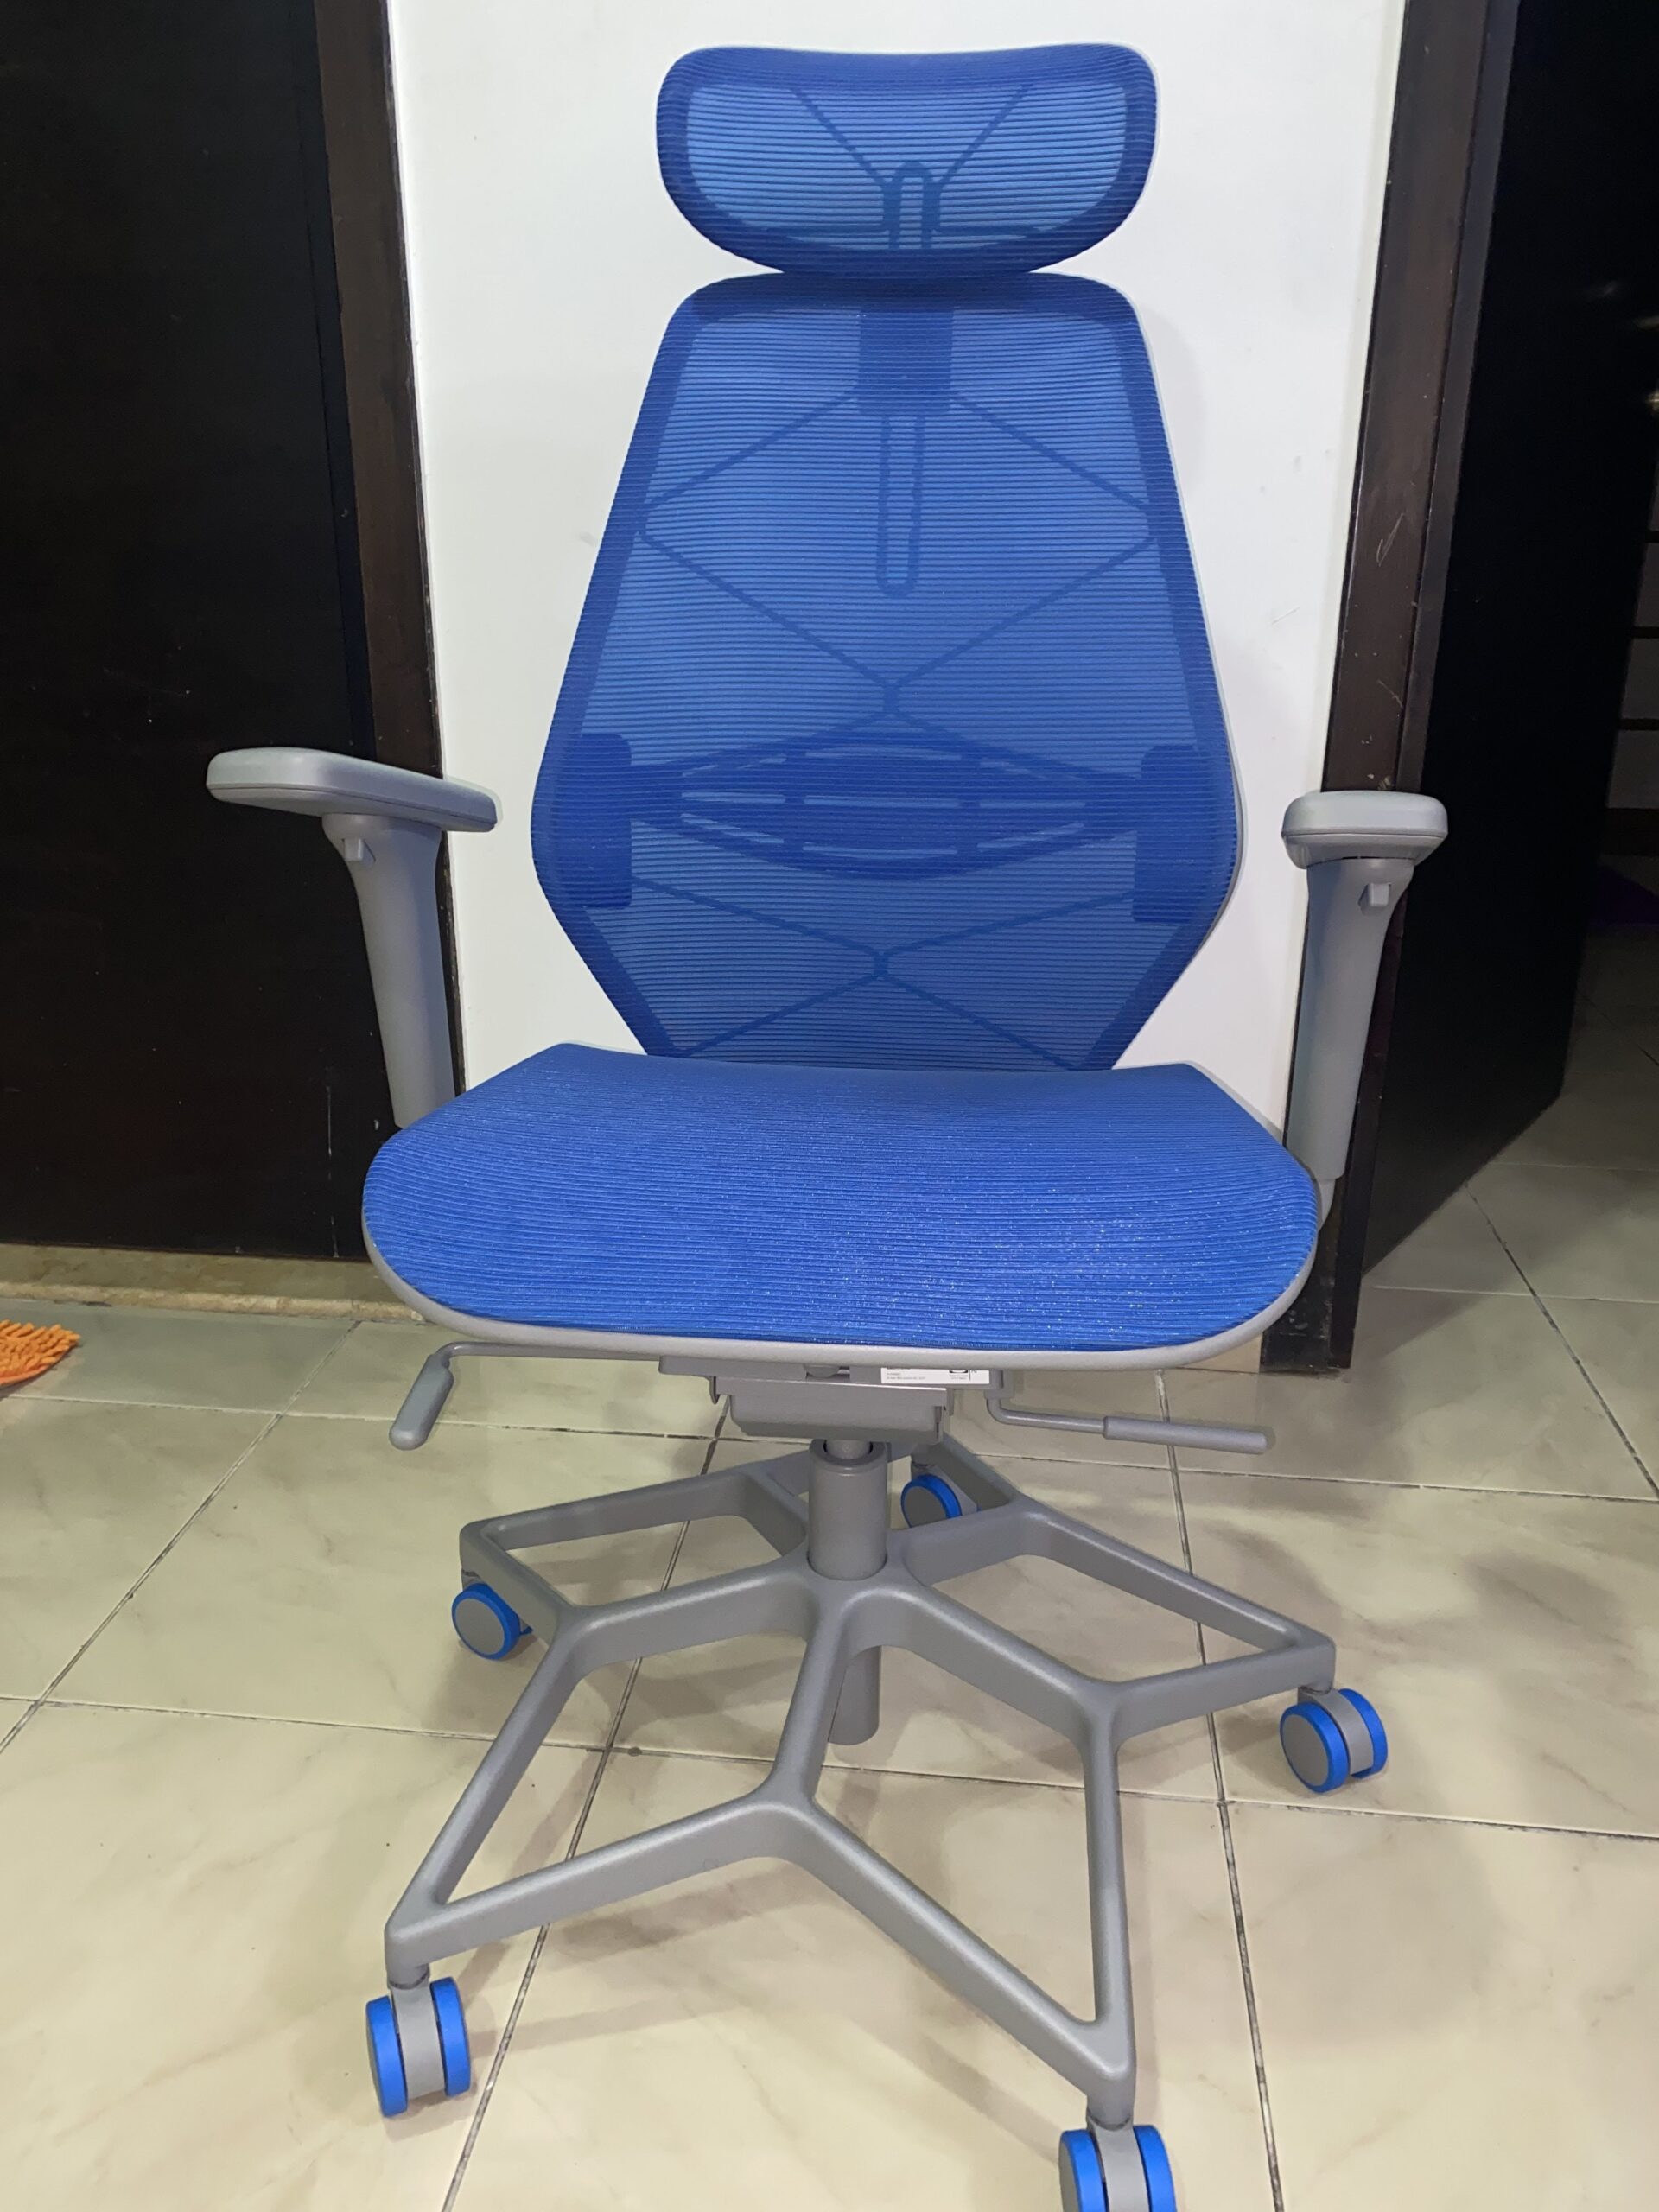 Discovering Comfort: Styrspel Chair Review